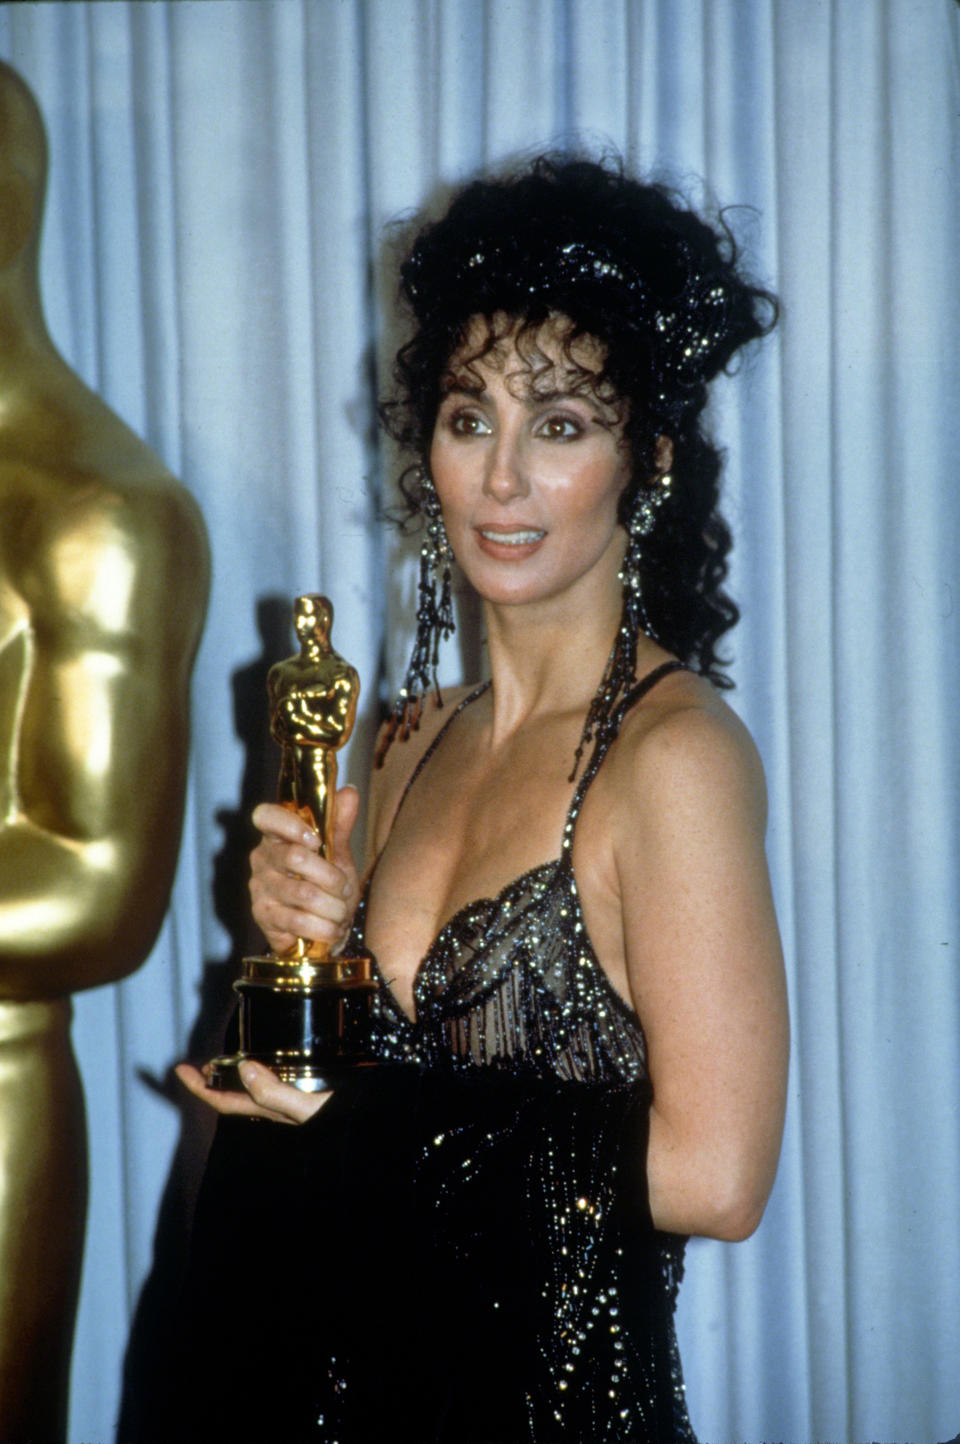 LOS ANGELES, CA - CIRCA 1988: Cher attends the 60th Academy Awards circa 1988 in Los Angeles, California. (Photo by Miguel Rajmil/IMAGES/Getty Images)